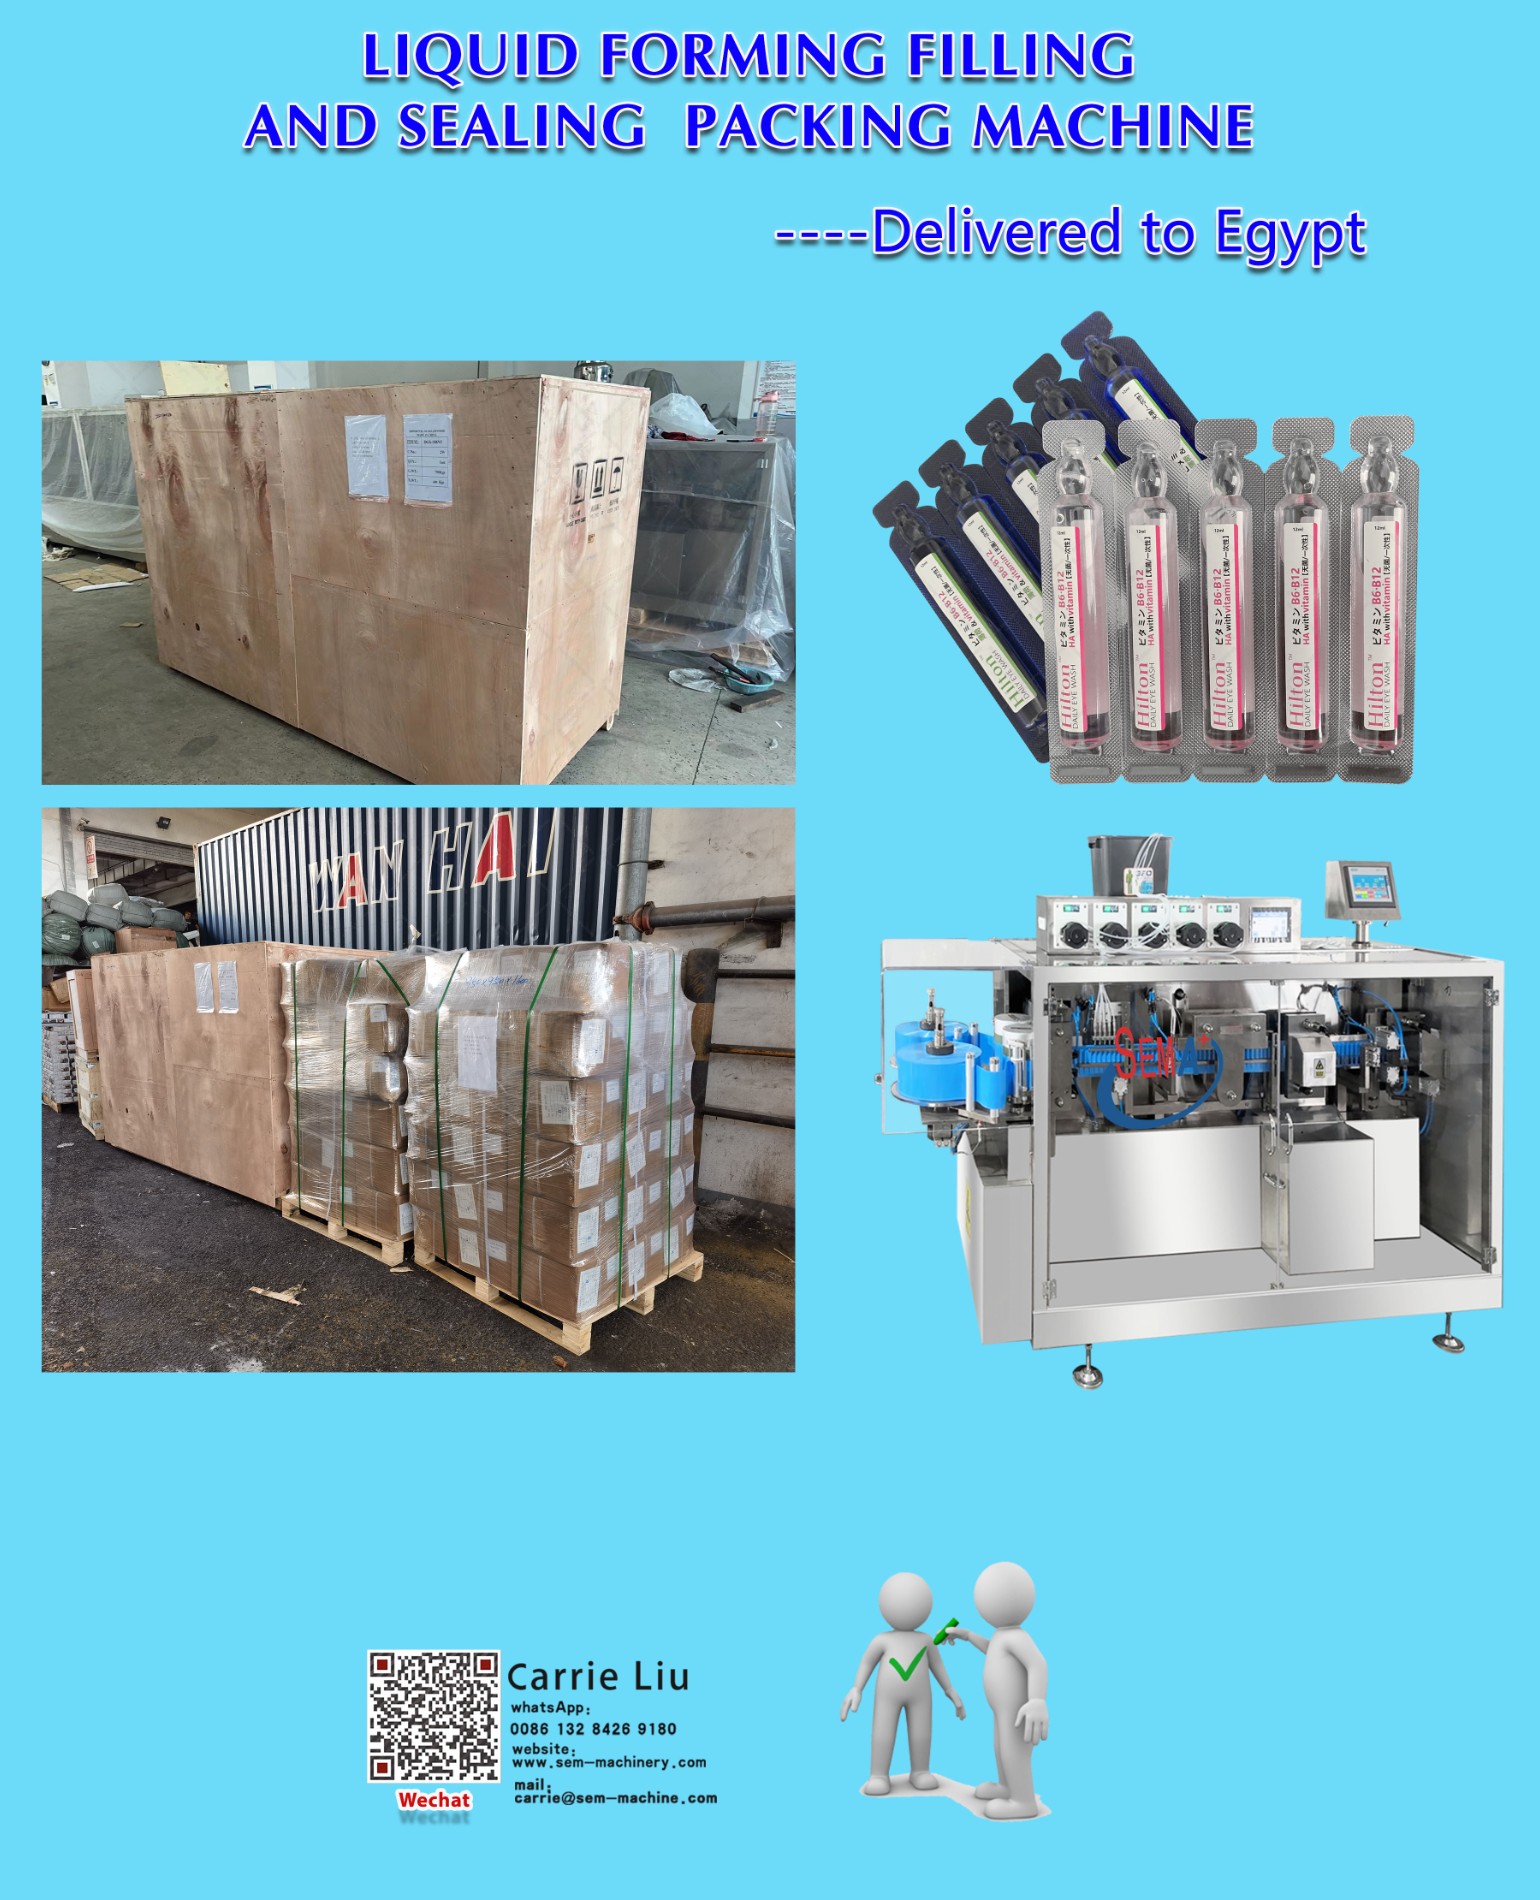 Liquid forming filling and sealing packing machine-Delivered to Egypt